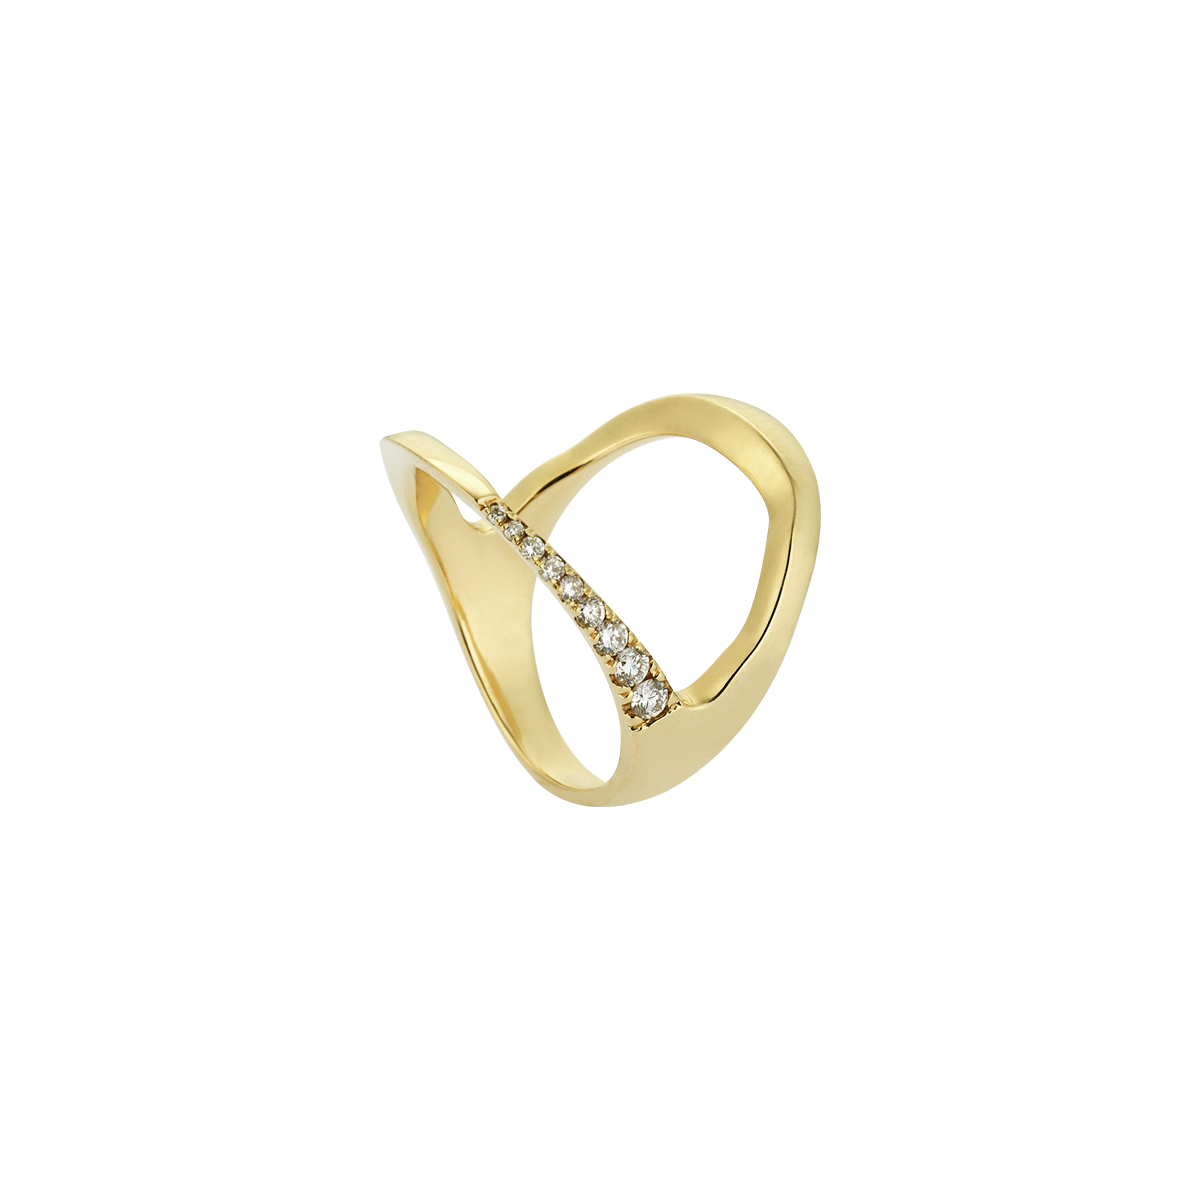 Asymmetric Side Midi Ring in Yellow Gold - Her Story Shop